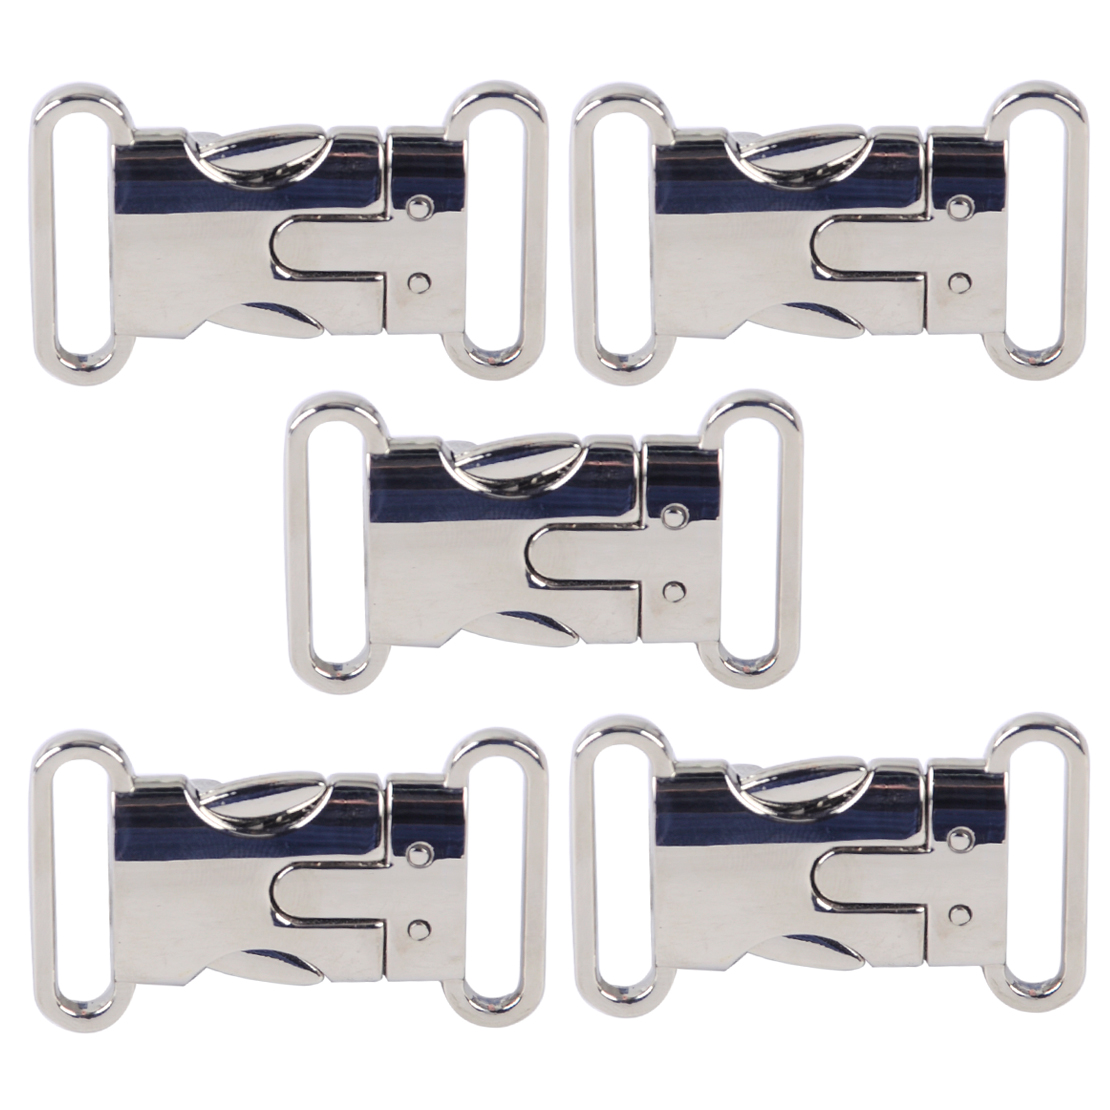 5pcs Metal Side Release Buckles Clips For Bags Straps Hiking Paracord Bracelet 